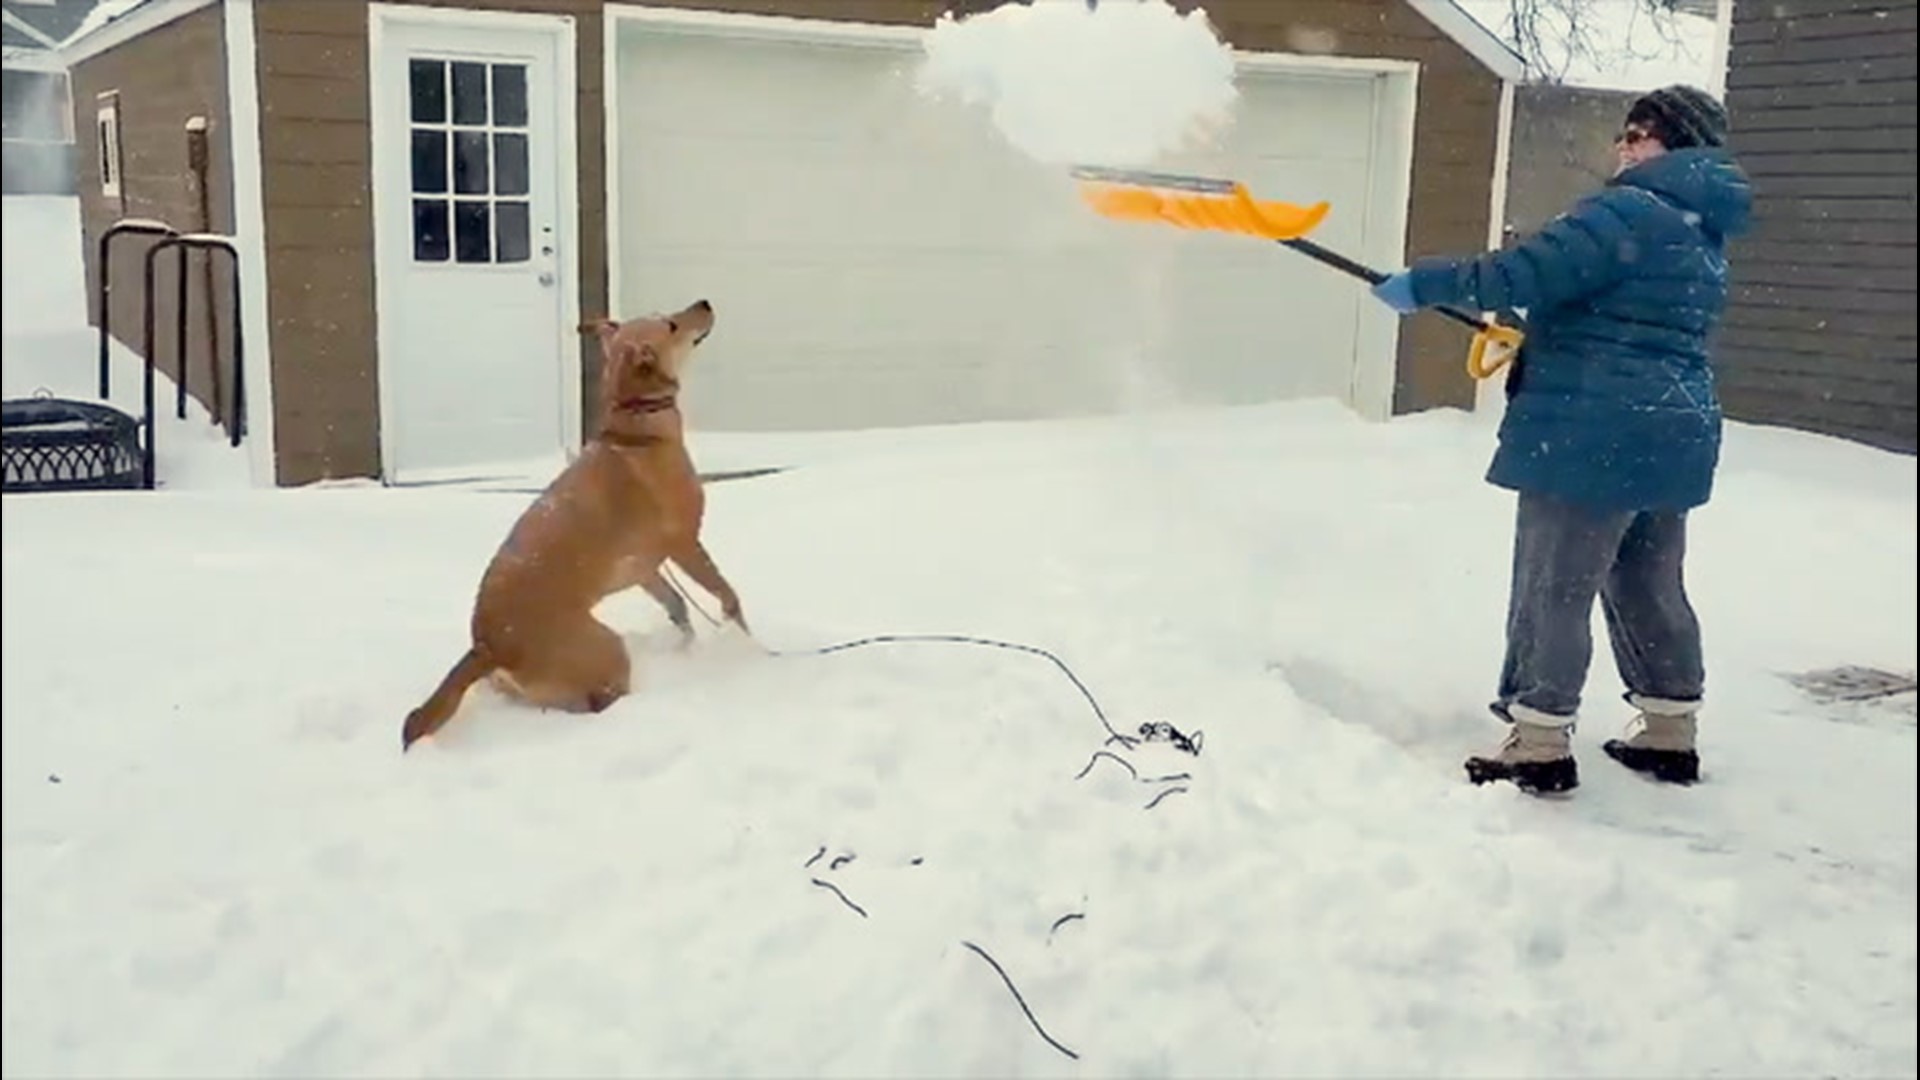 While the residents of Luverne, Minnesota, were stuck shoveling snow on Jan. 16, all one dog wanted to do was play.